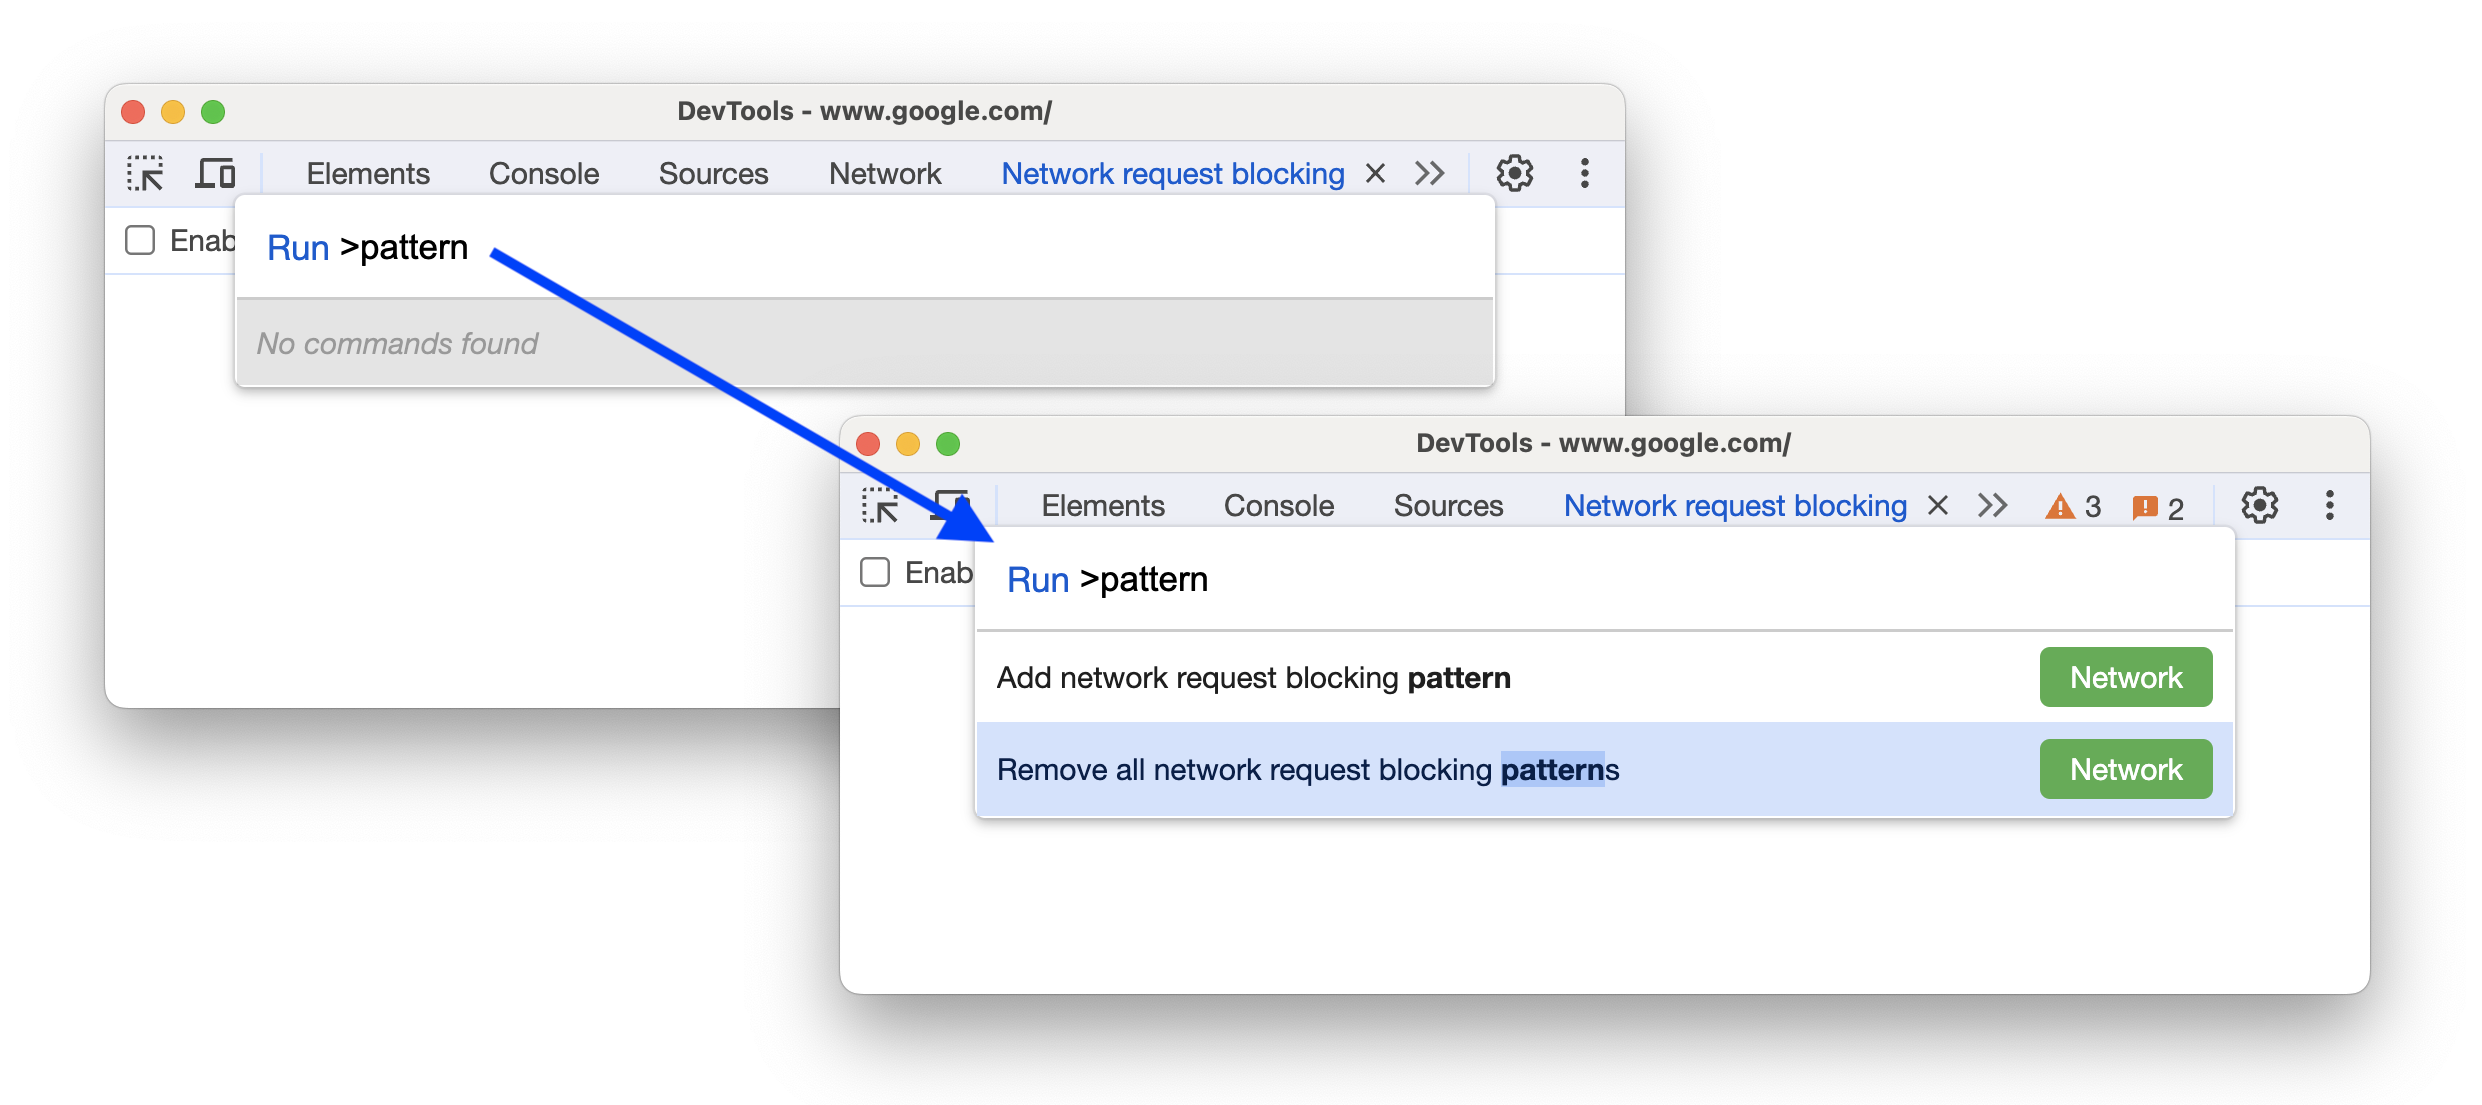 The before and after adding new commands to add or remove network blocking patterns.